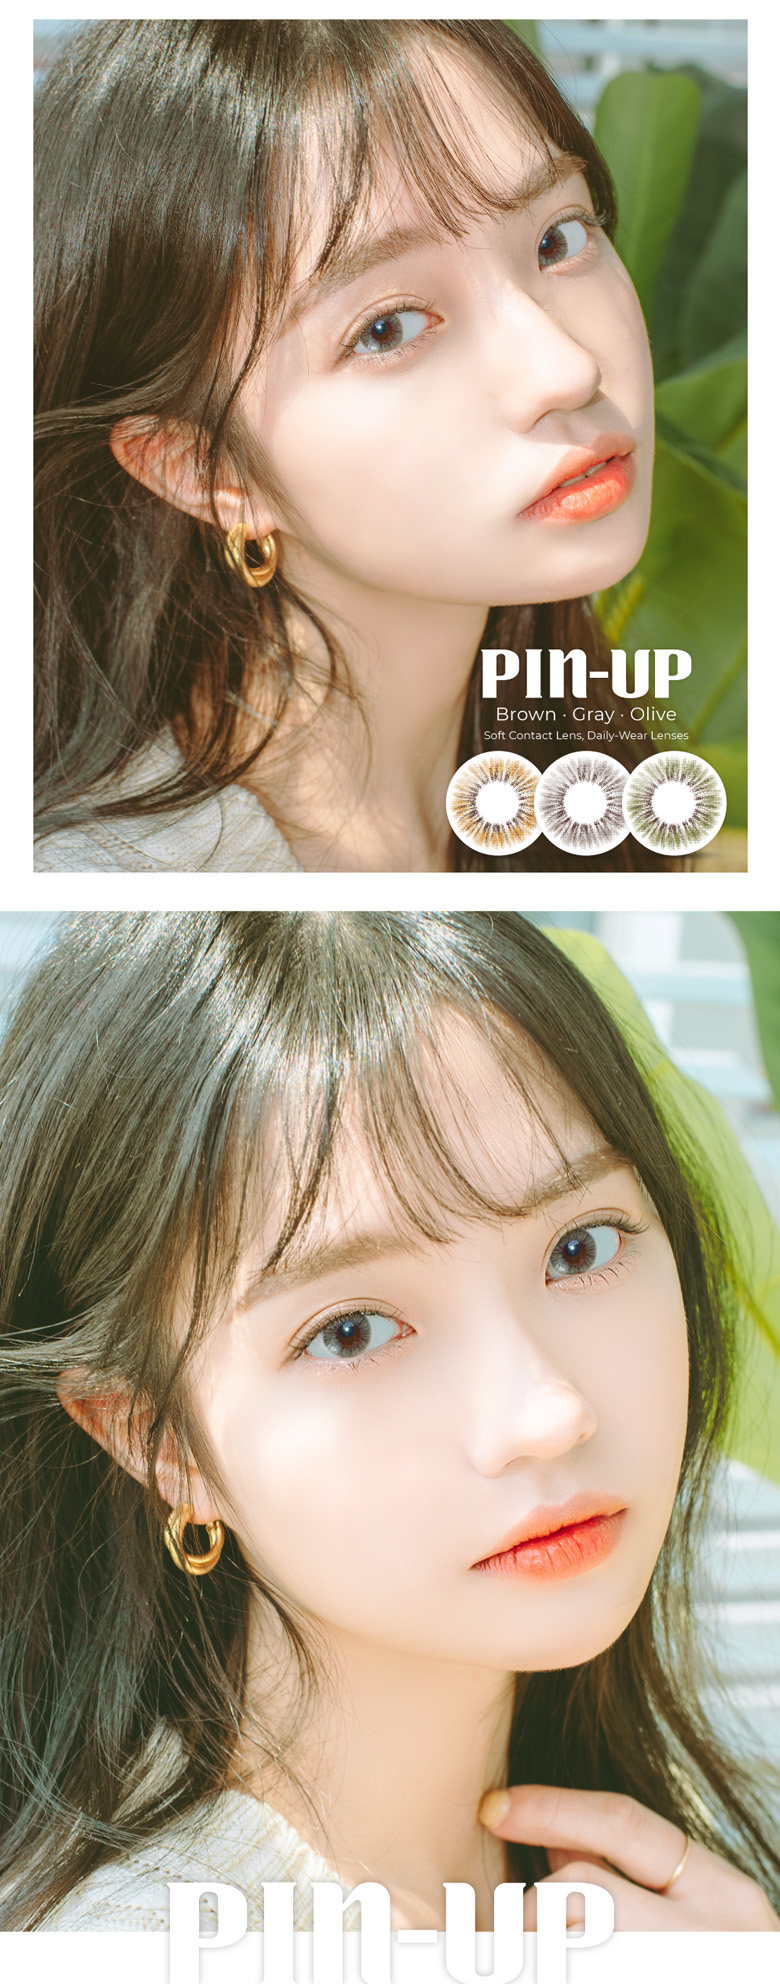 [3 Month/オリーブ/Olive] アイビュー ピンアップ - 3ヶ月 - EyeView Pin-Up - 3 Month (1pcs*2pack) [14.2mm]